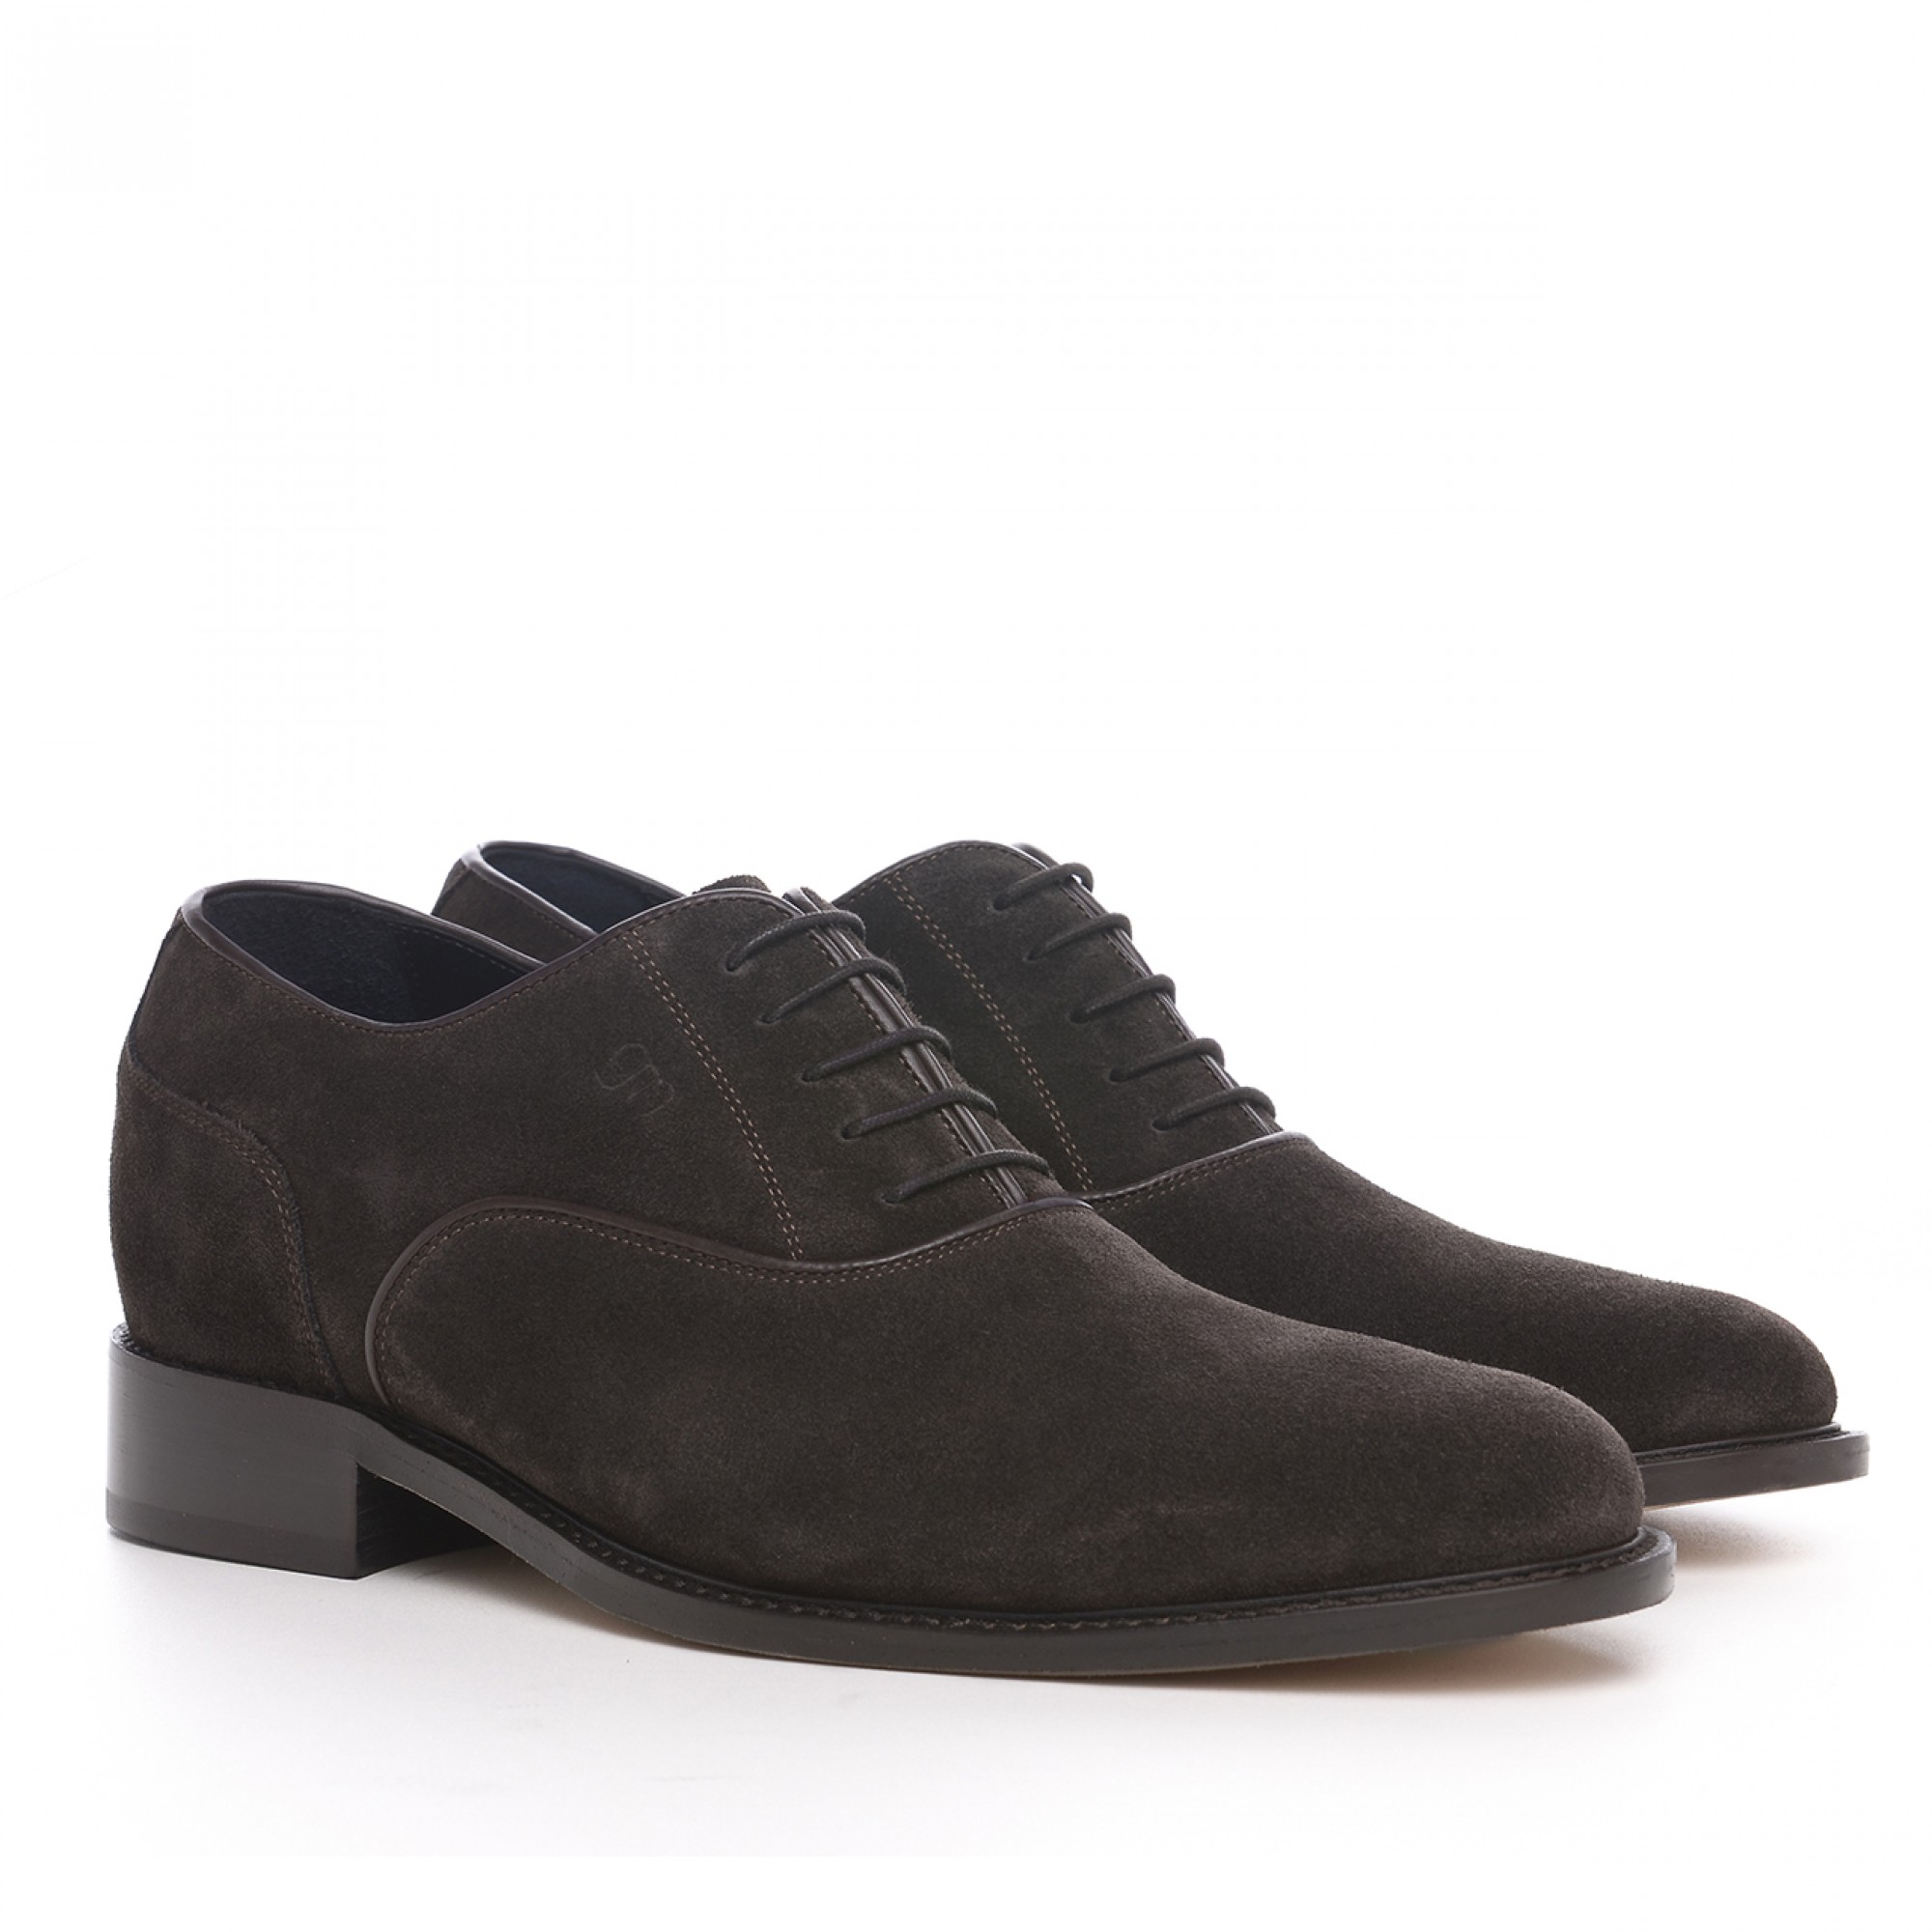 Urbino - Elevator Shoes in Suede Leather from 2.4 to 3.1 inches